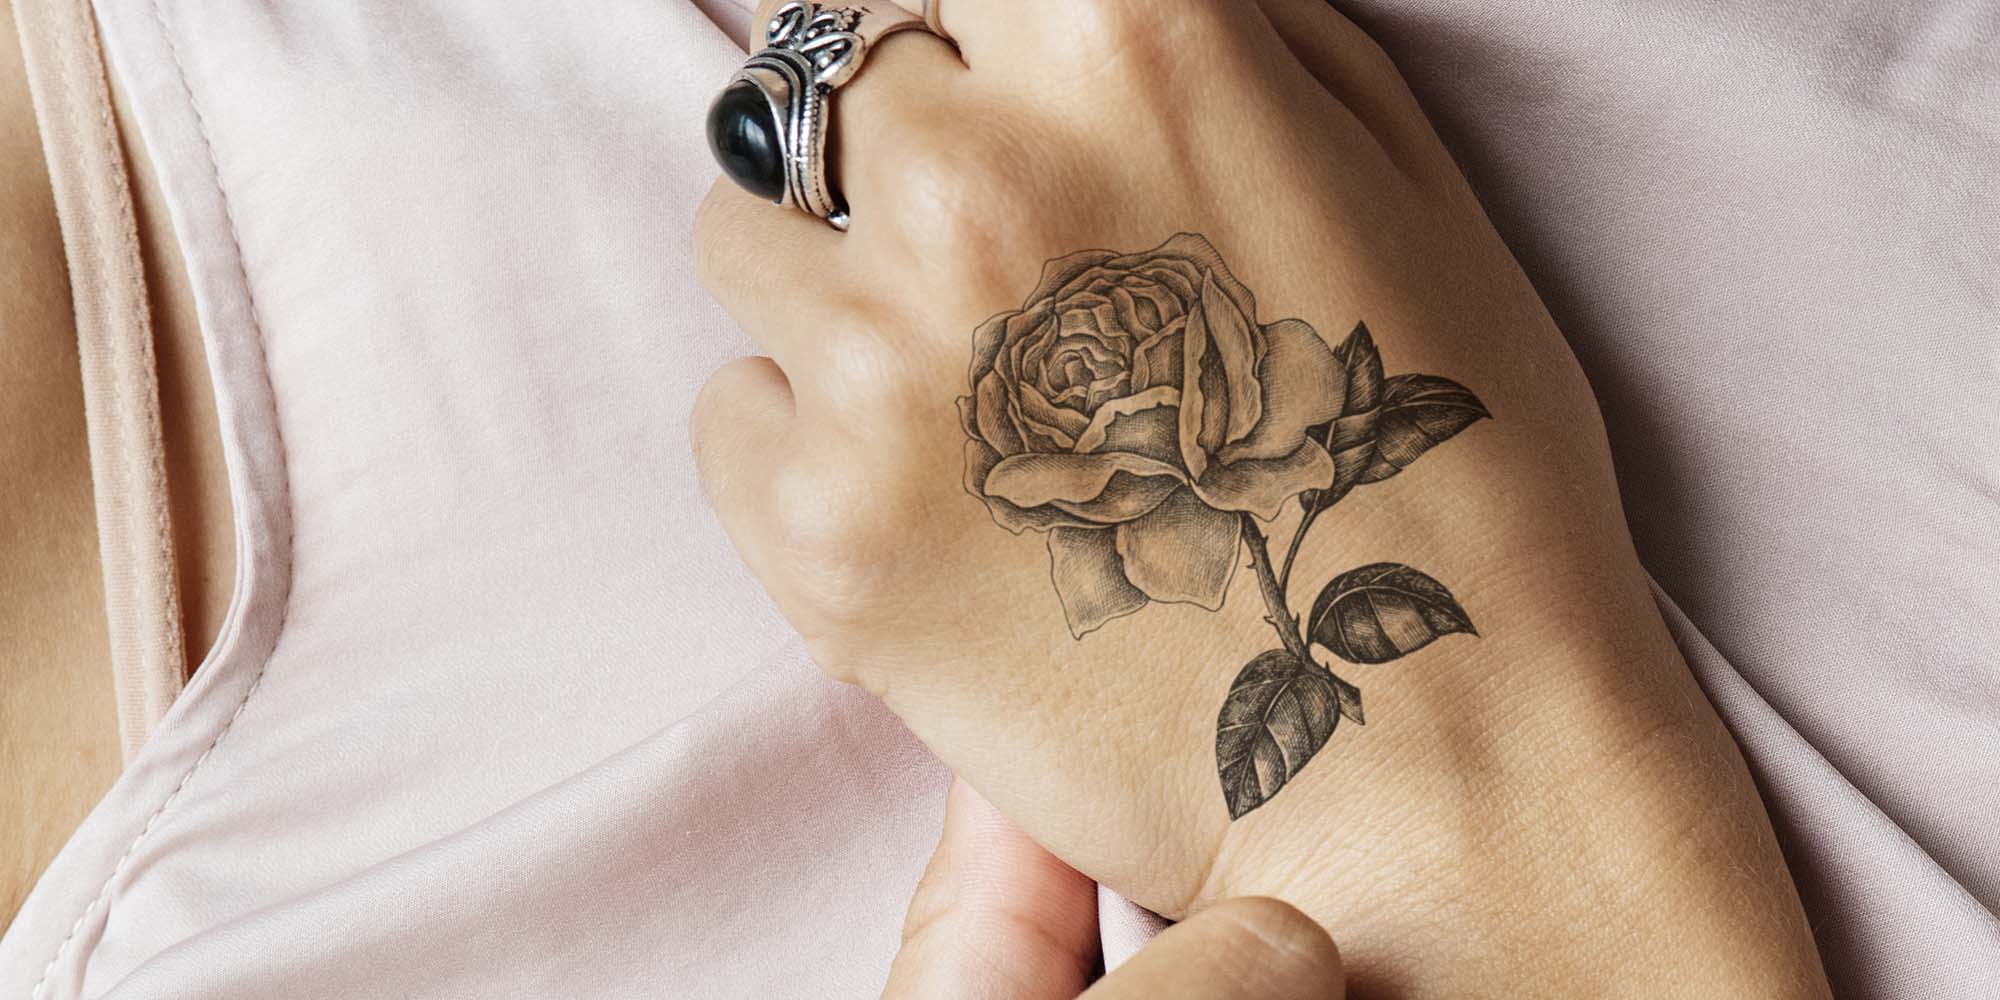 Closeup of hand tattoo of a woman